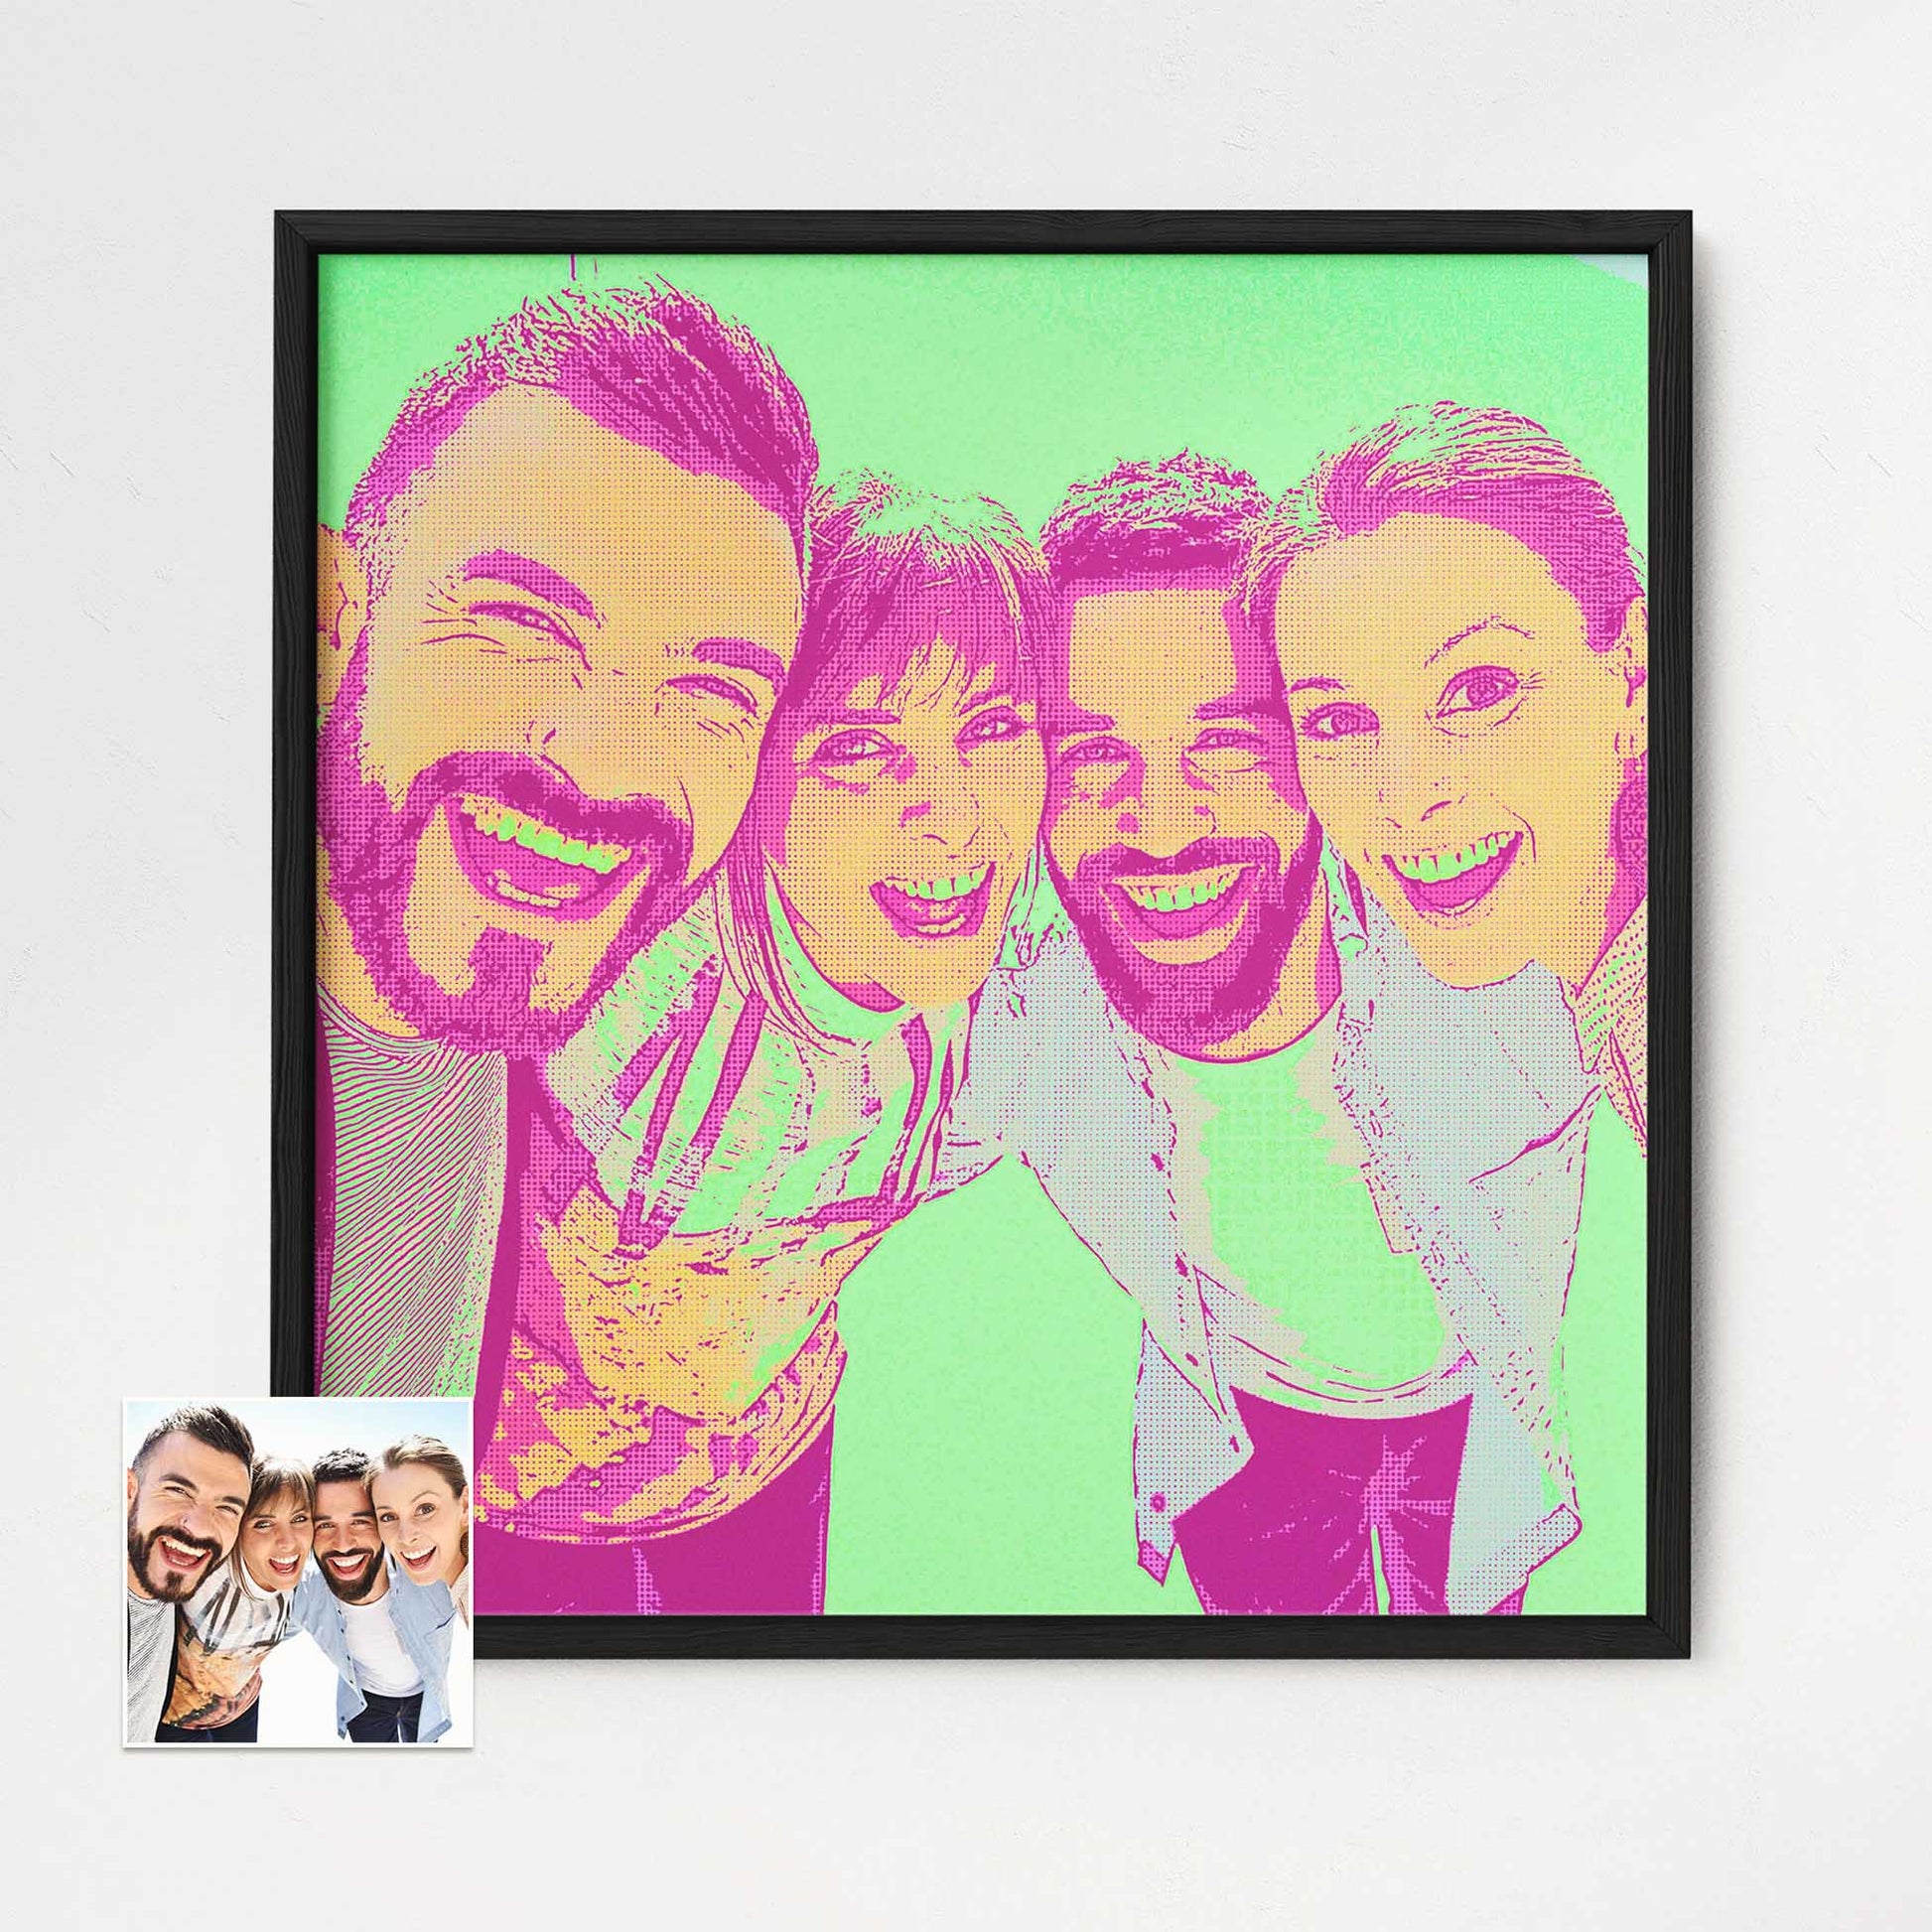 Capture the vibrancy of life with a Personalised Green & Pink Pop Art Framed Print from your photo. Bursting with color, this artwork brings a fun and exciting energy to any space. Made with thick museum-quality paper and framed in natural 